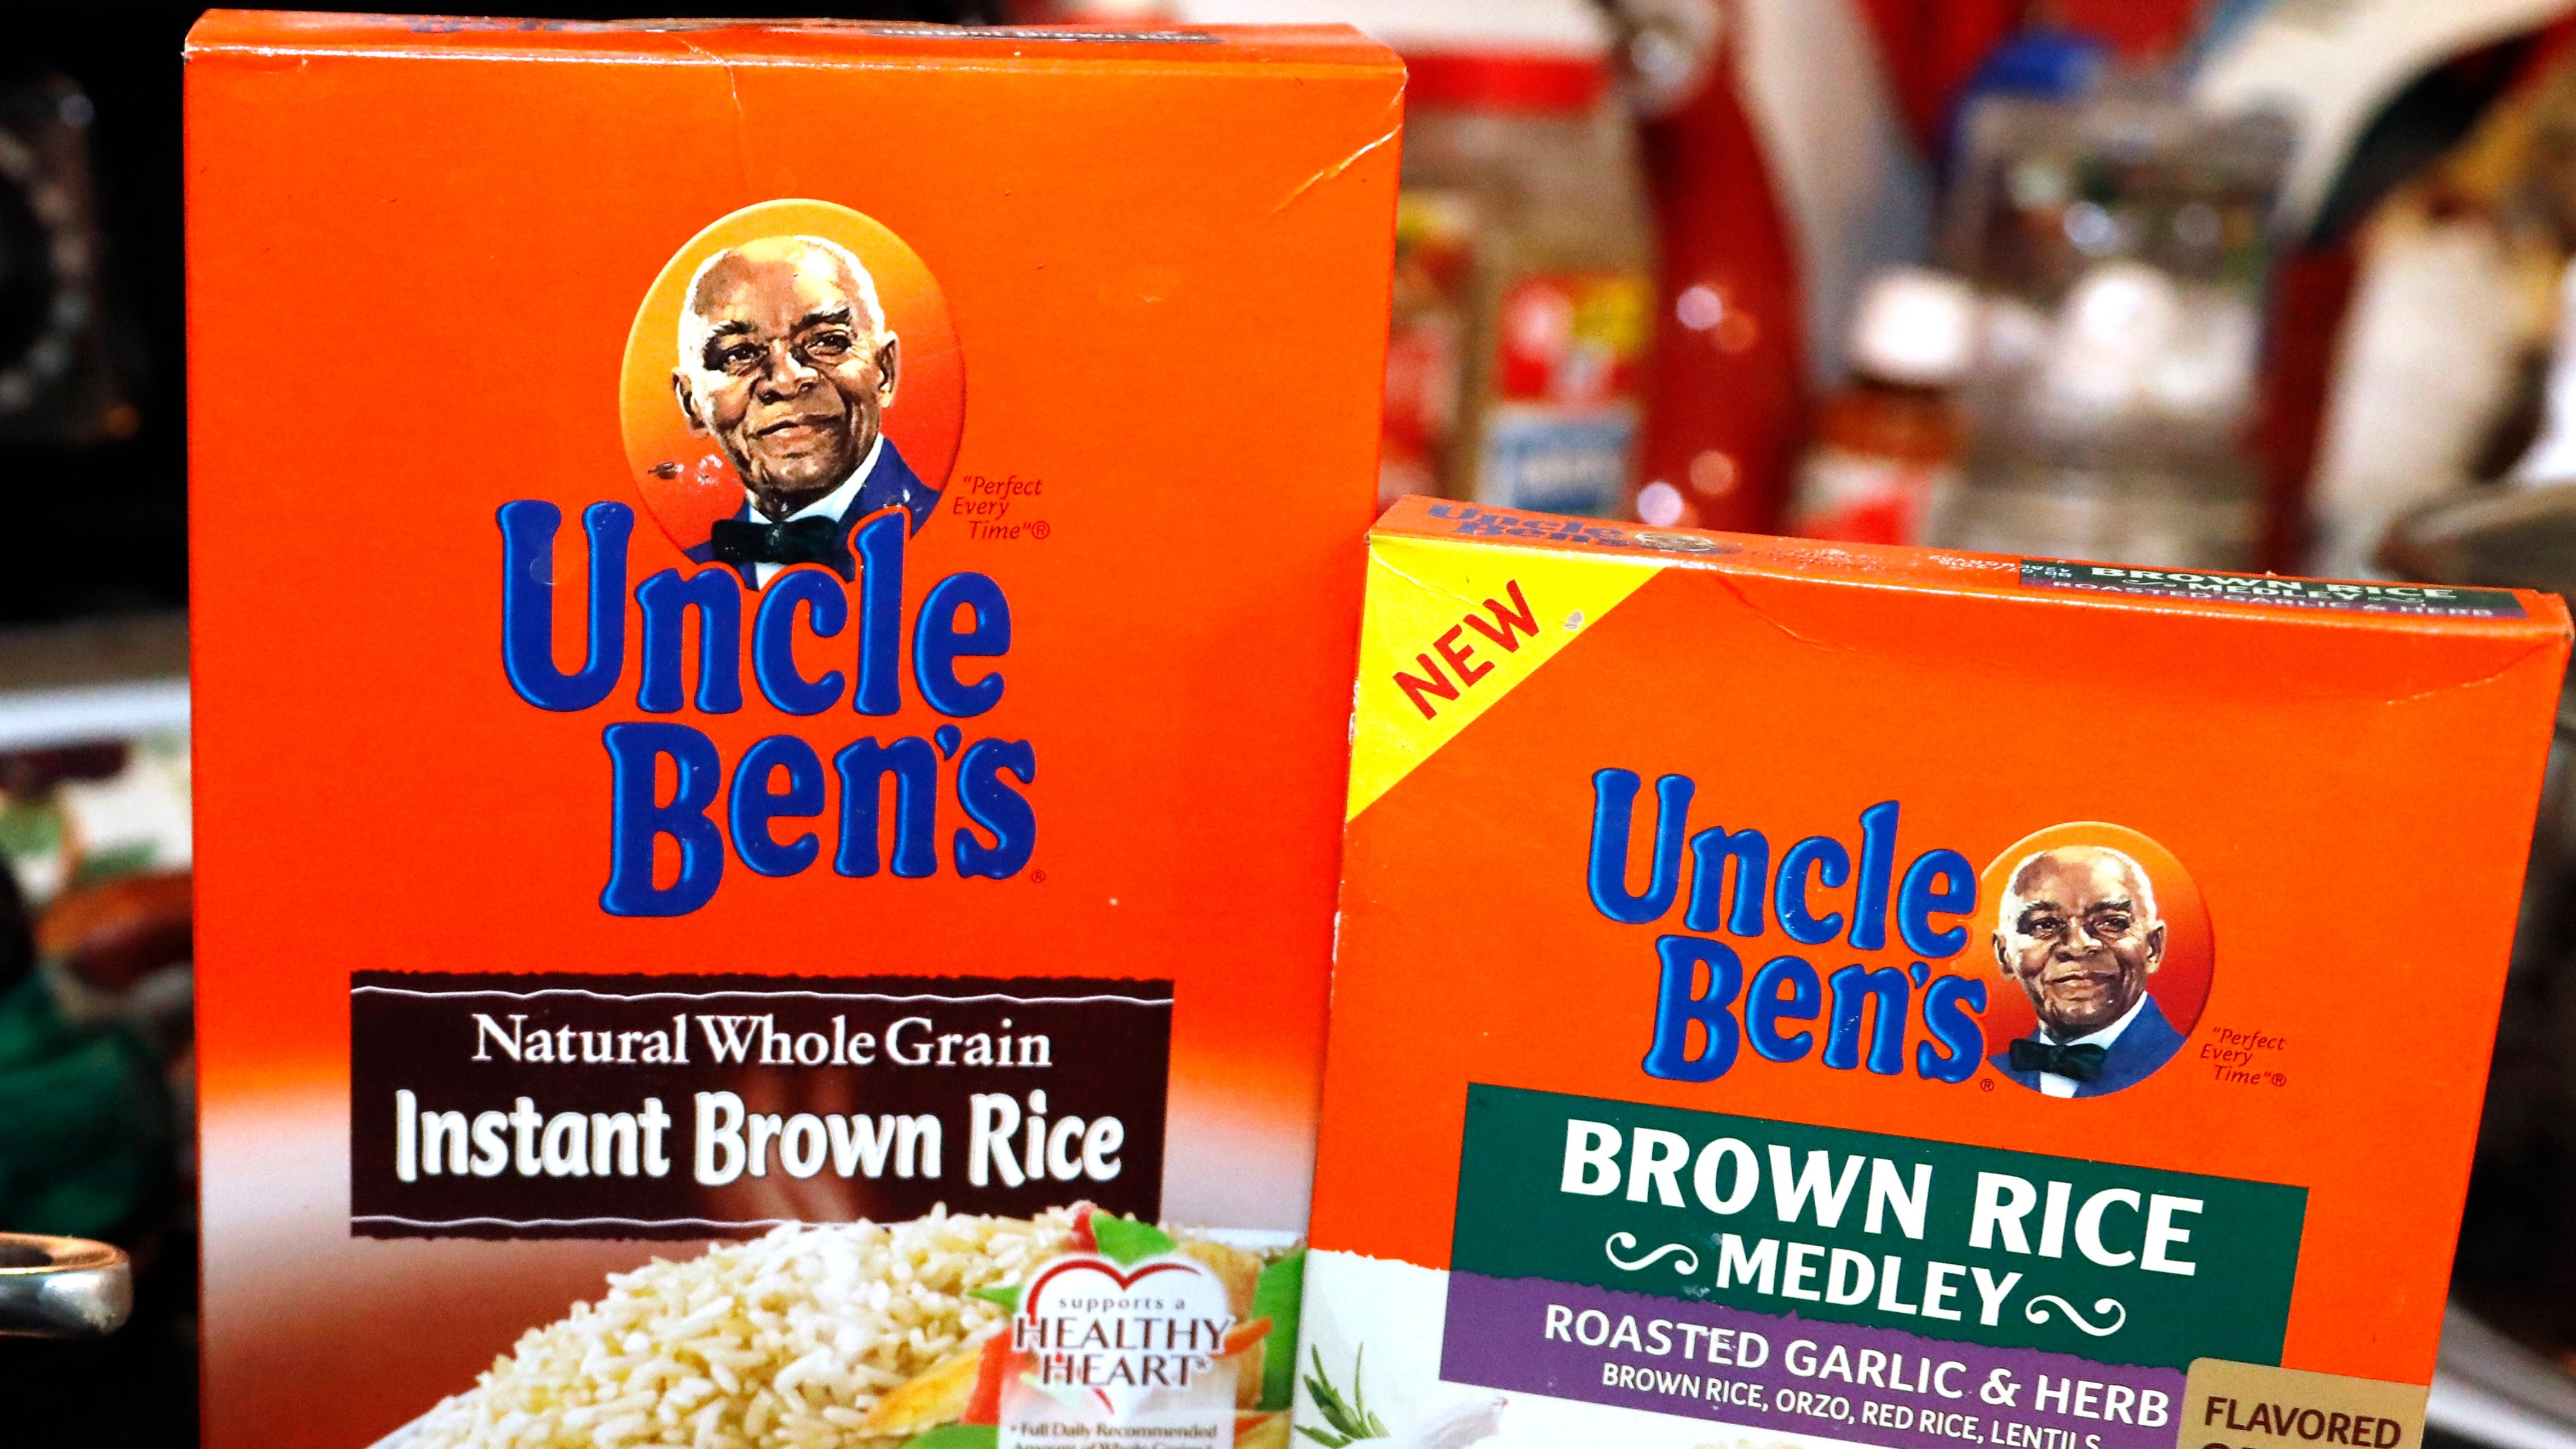 Uncle Ben's rice gets rebrand after racial stereotyping criticism, Black  Lives Matter